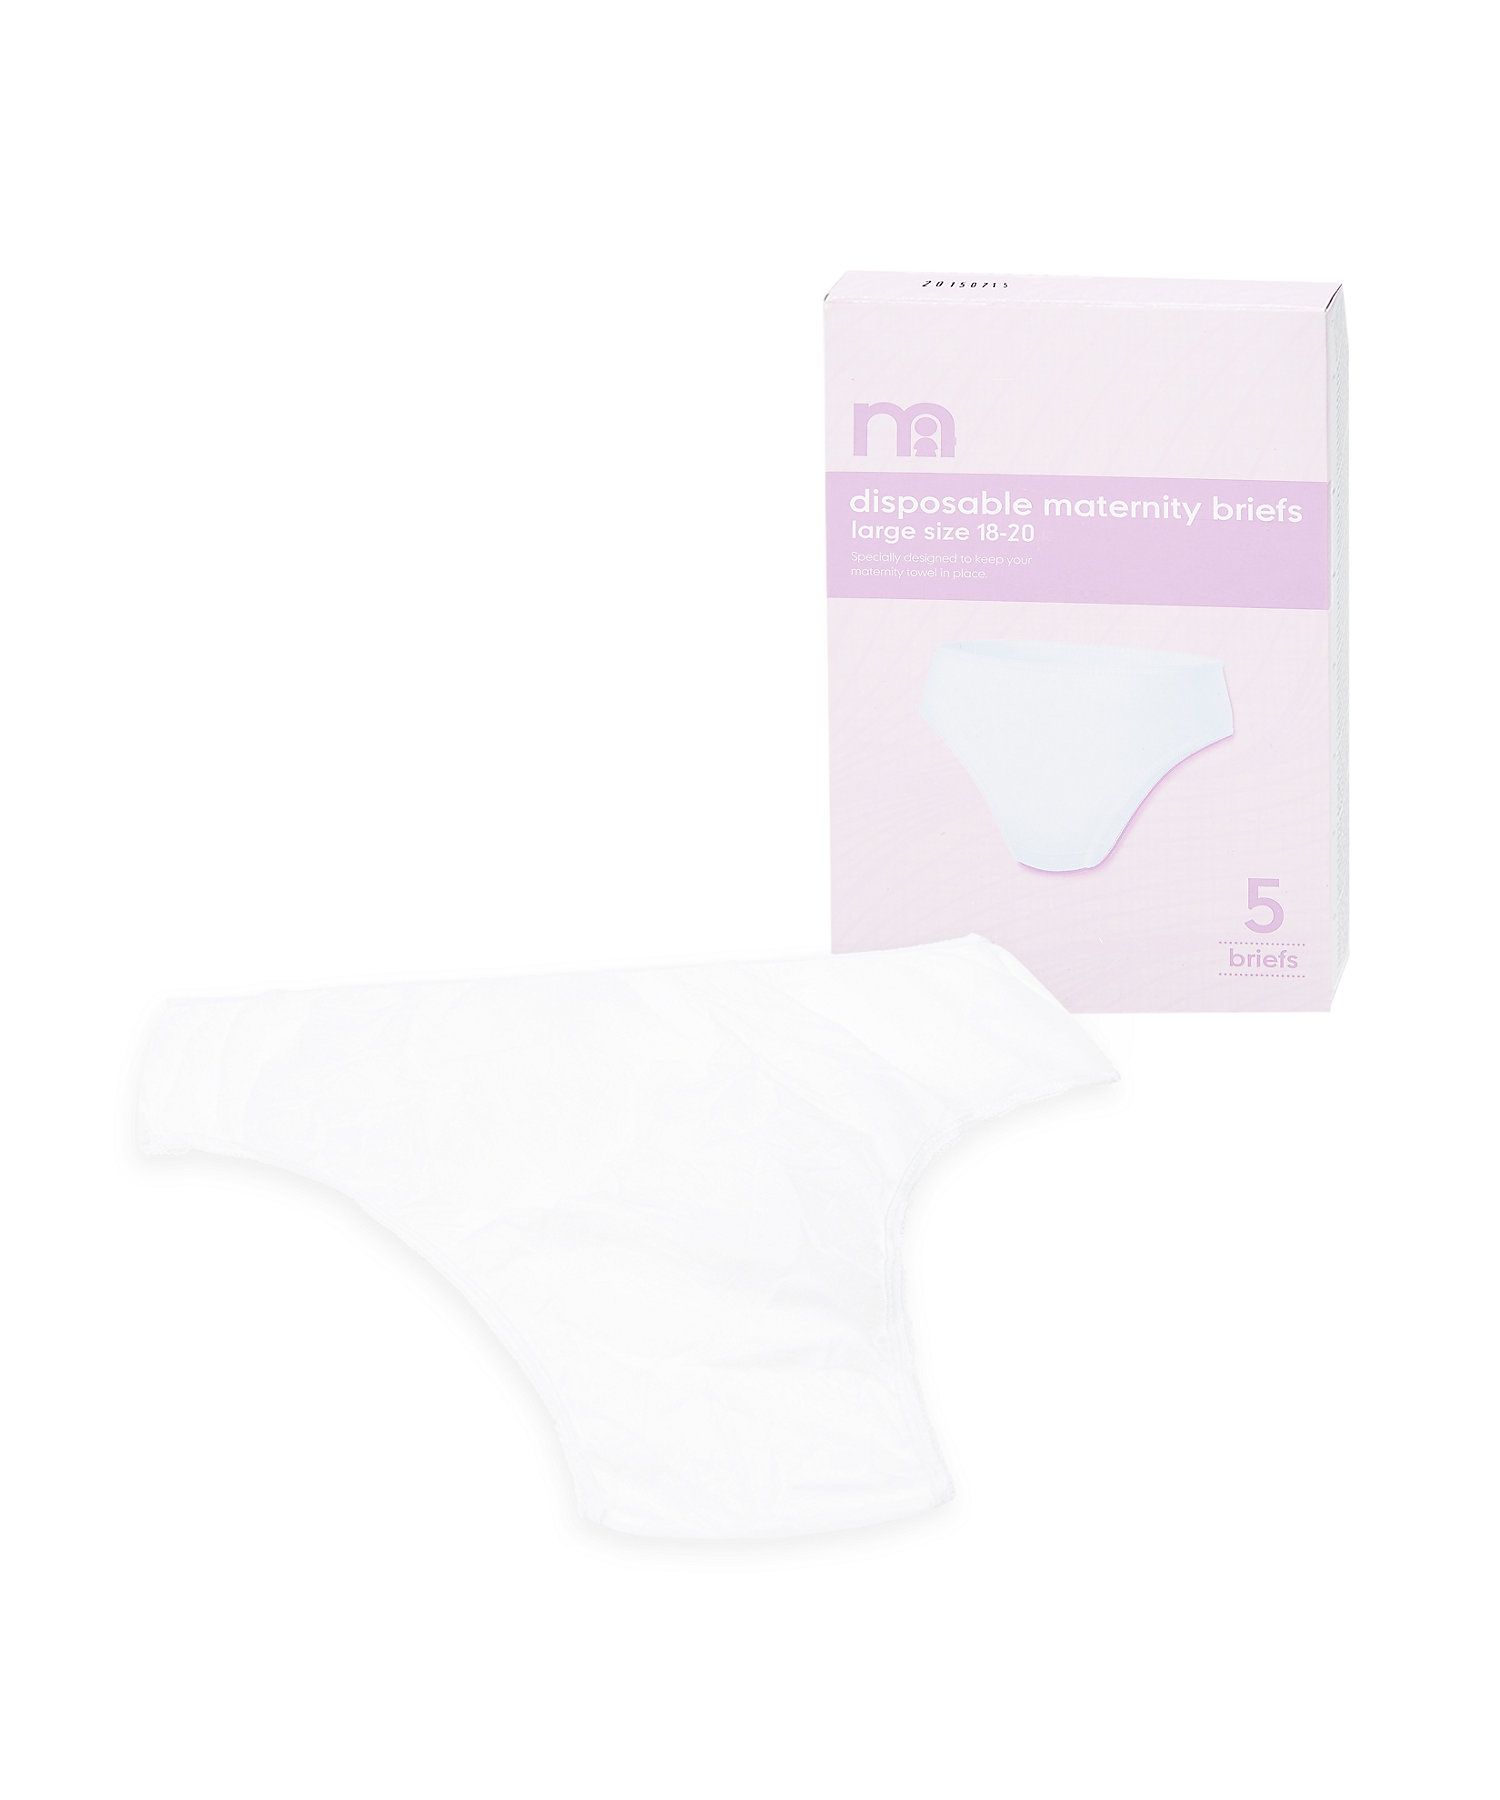 Sainsbury's for Mum Maternity Briefs Large Size 18/20 x5 